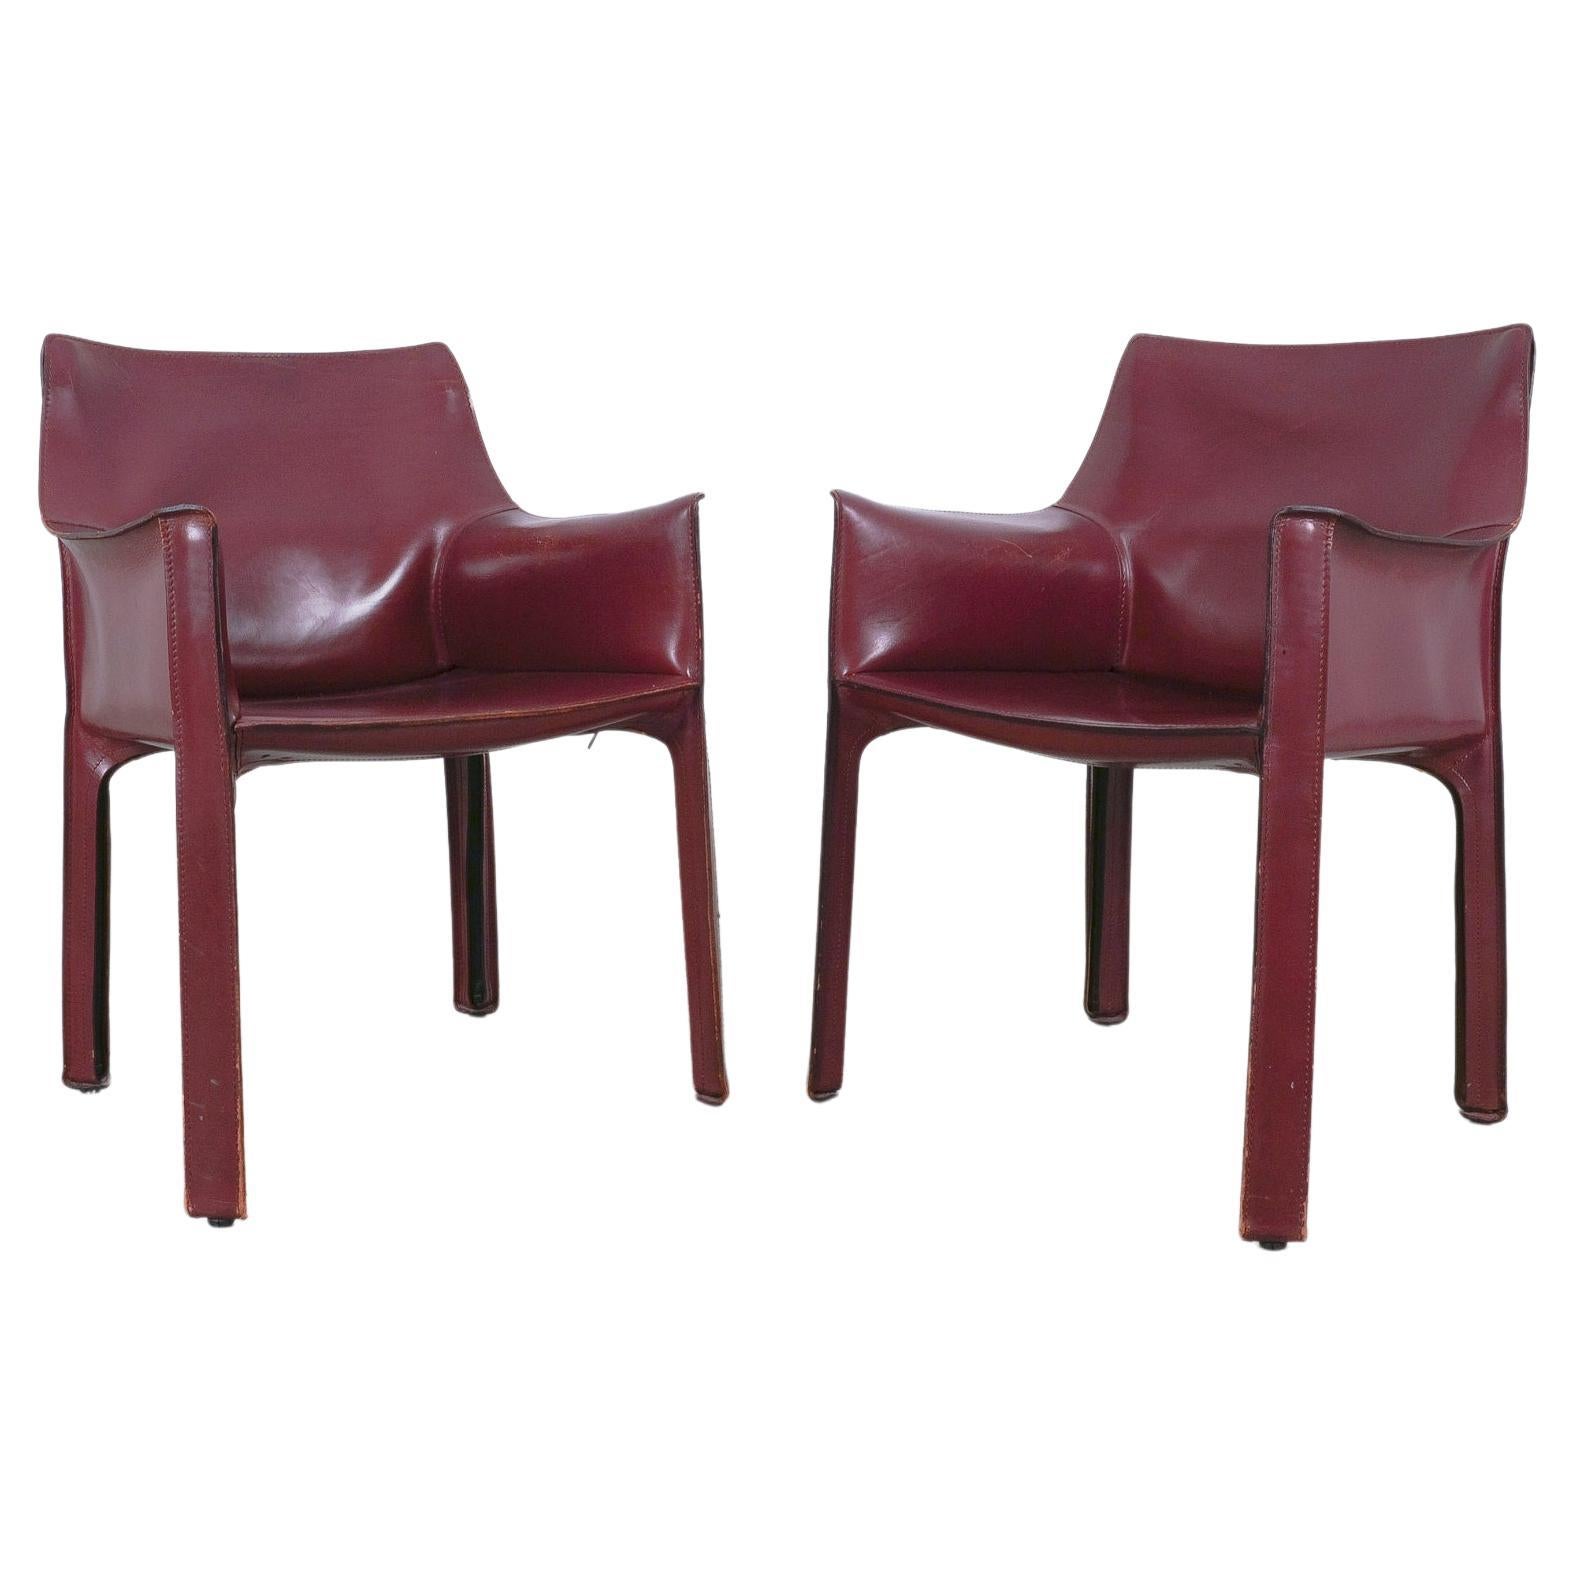 Mario Bellini Cassina Cab 413 Burgundy Red Leather Dining Chairs, 1980